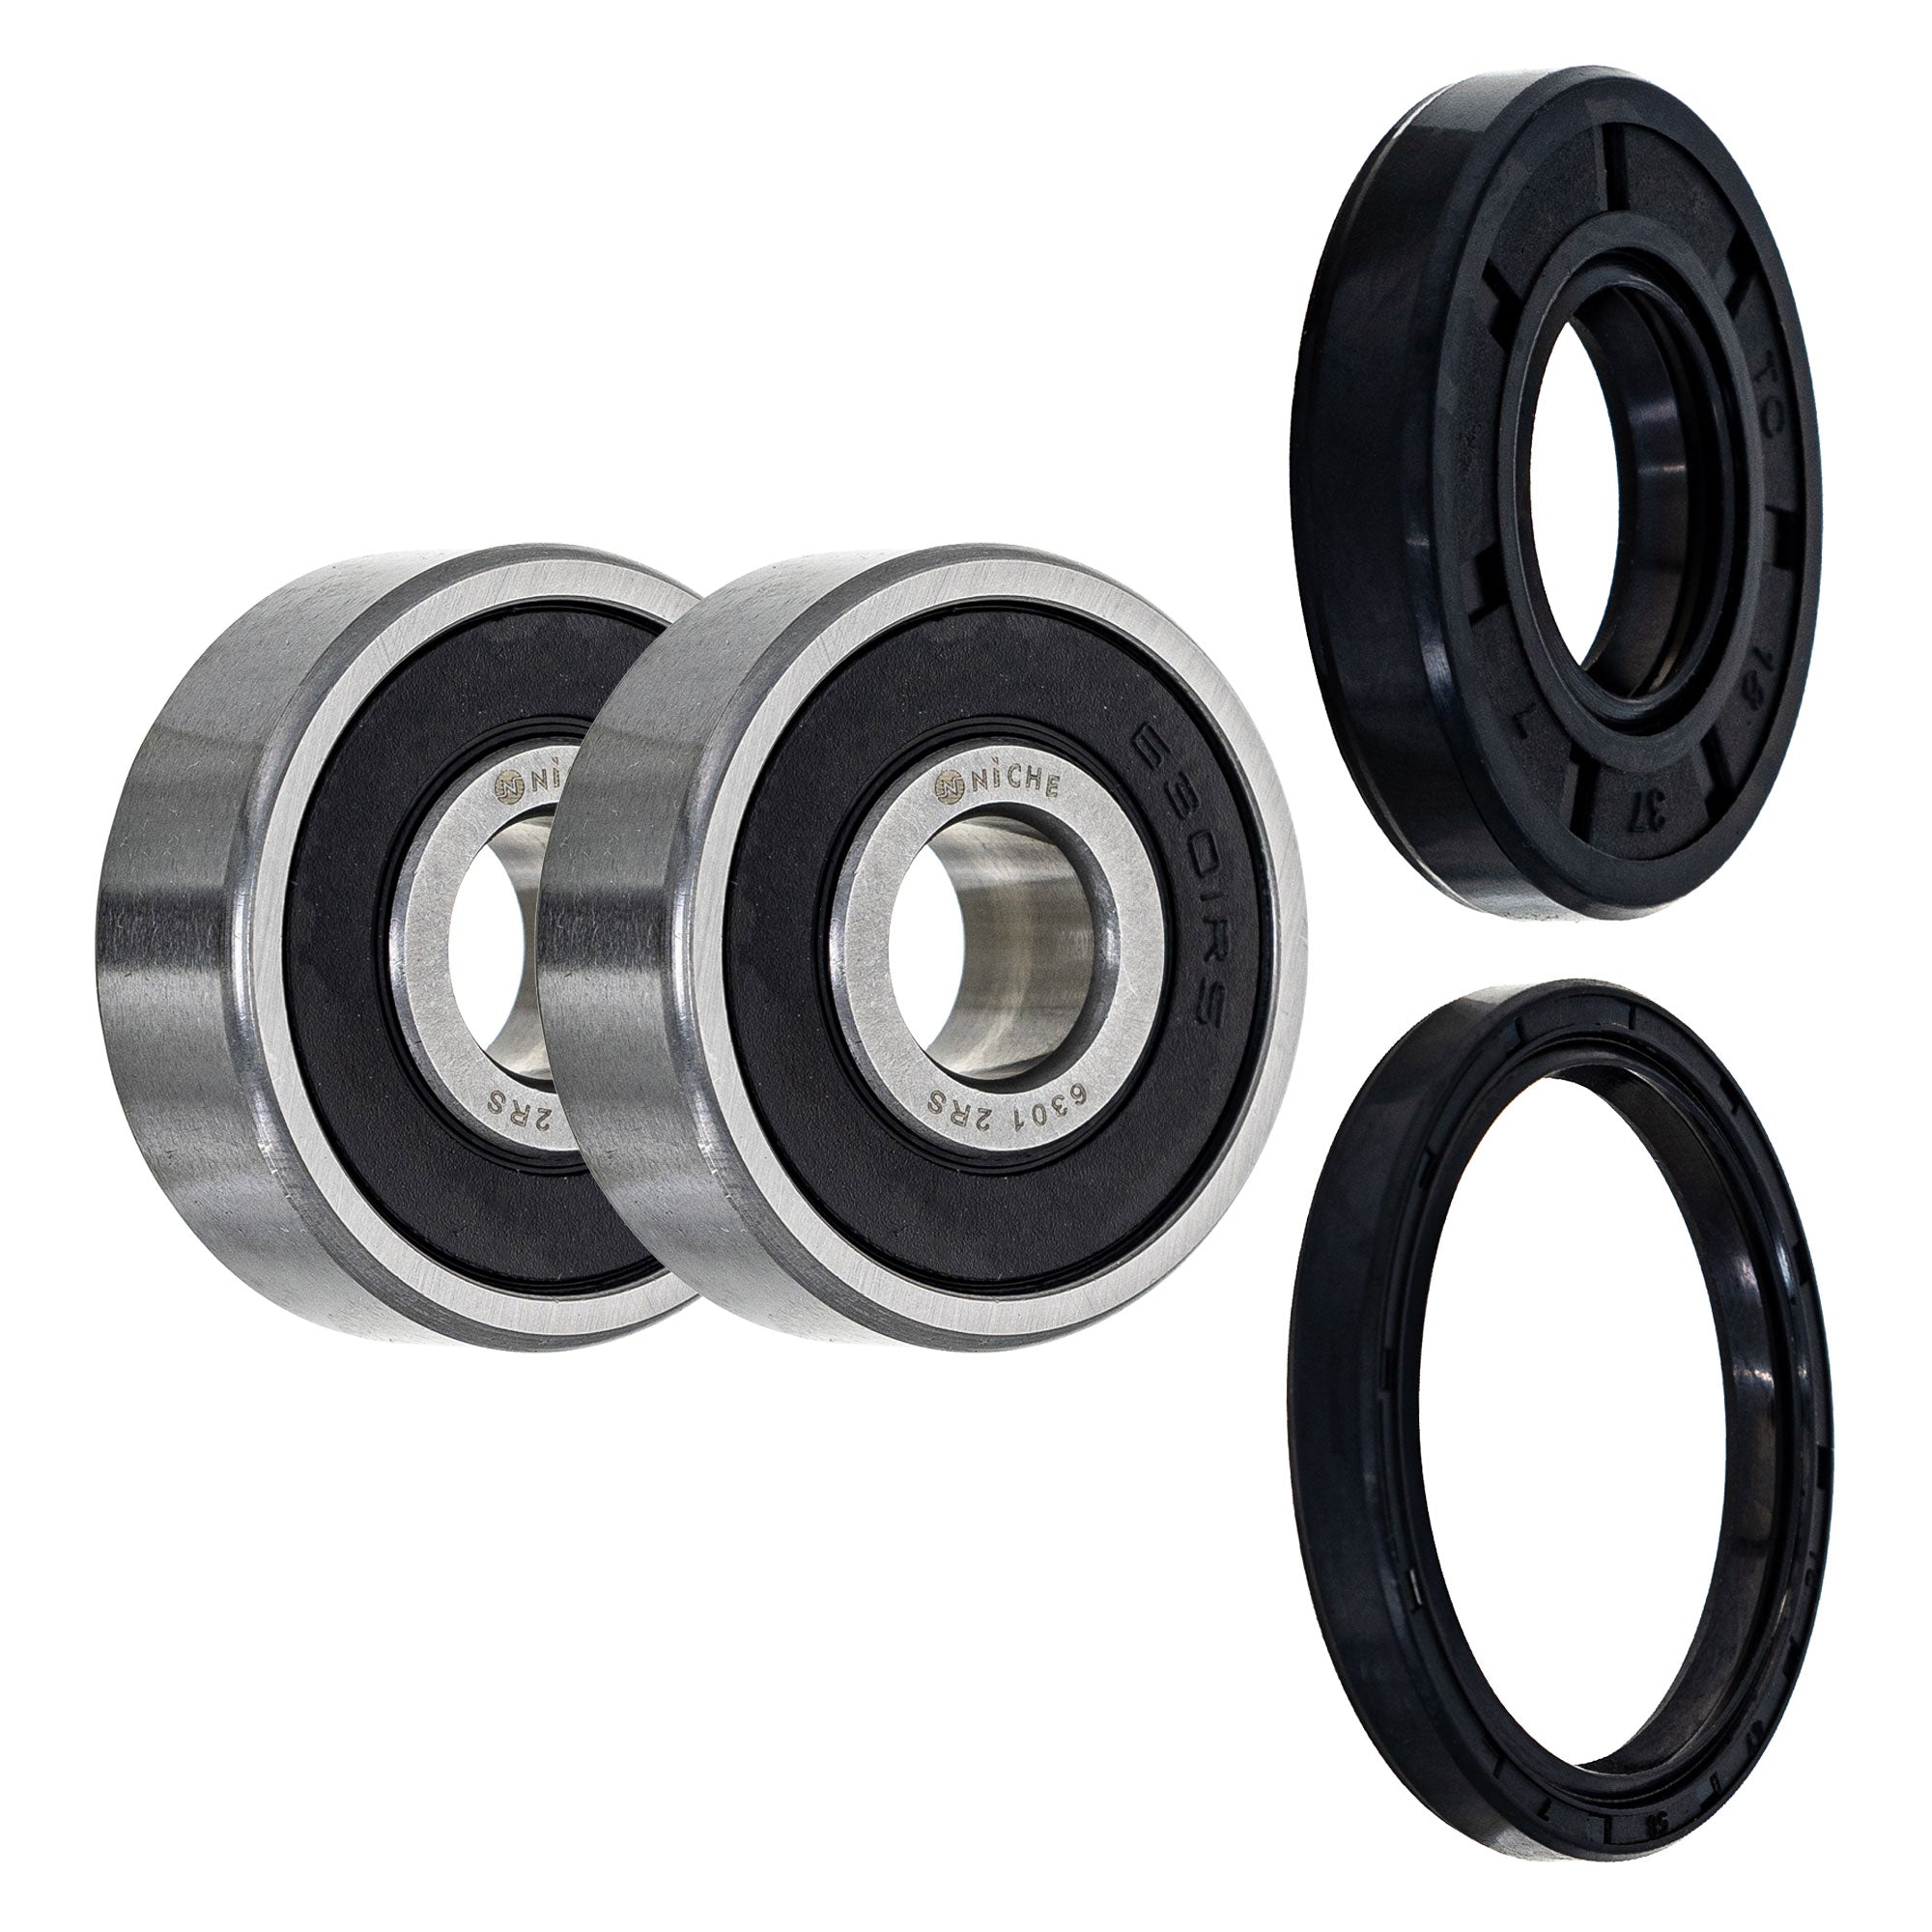 Wheel Bearing Seal Kit for zOTHER RS100 NICHE MK1008954